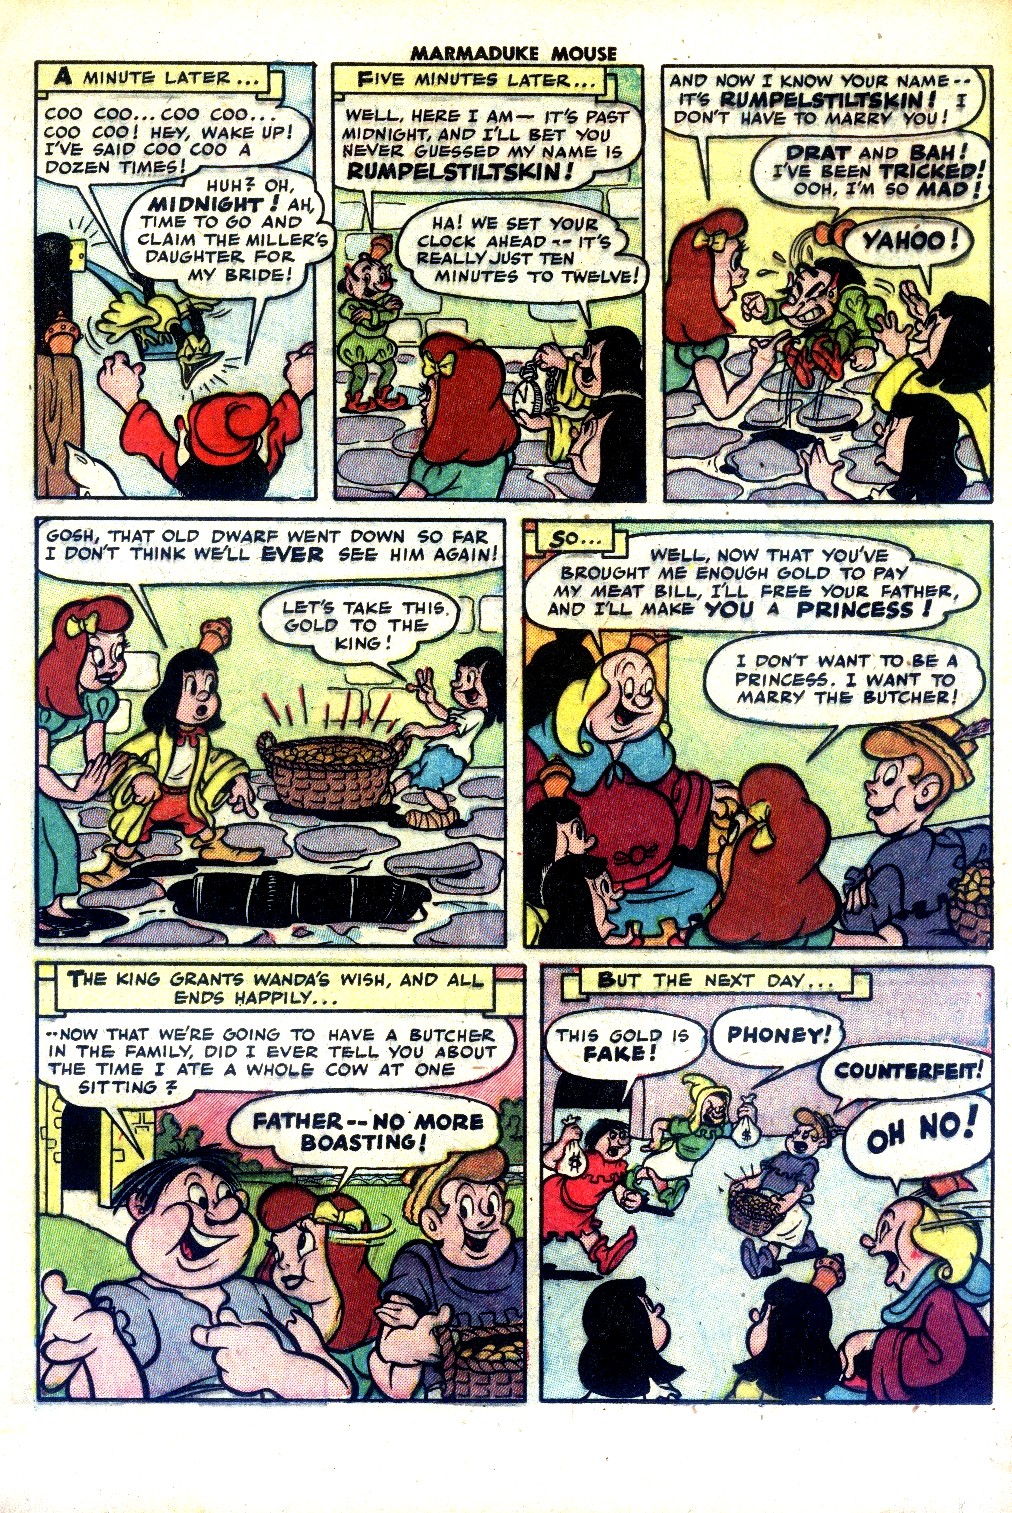 Read online Marmaduke Mouse comic -  Issue #40 - 13